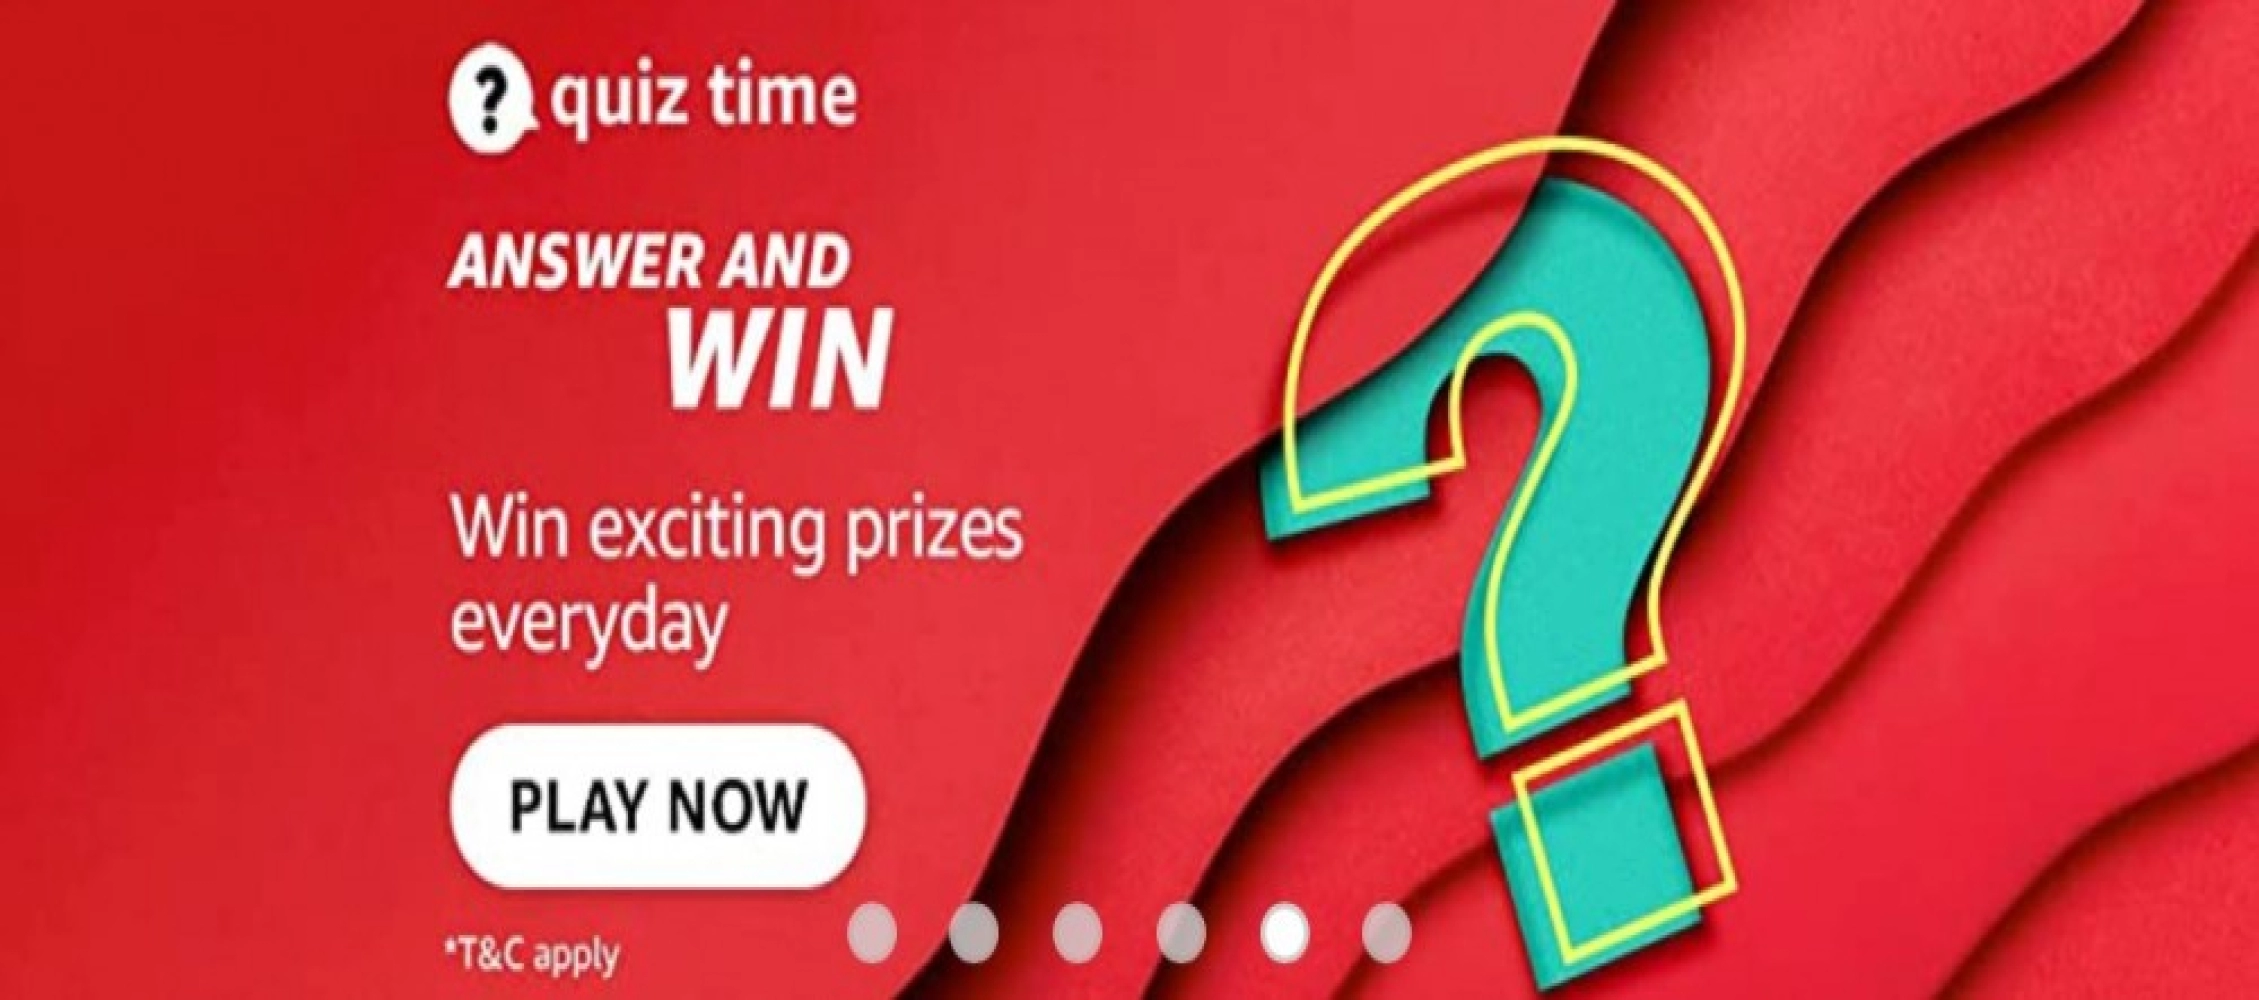 AMAZON QUIZ CONTEST: 21 FEBRUARY, 2022 - ANSWER TODAY FOR THE QUESTIONS AND GET A CHANCE TO WIN AMAZON PAY RS.15,000